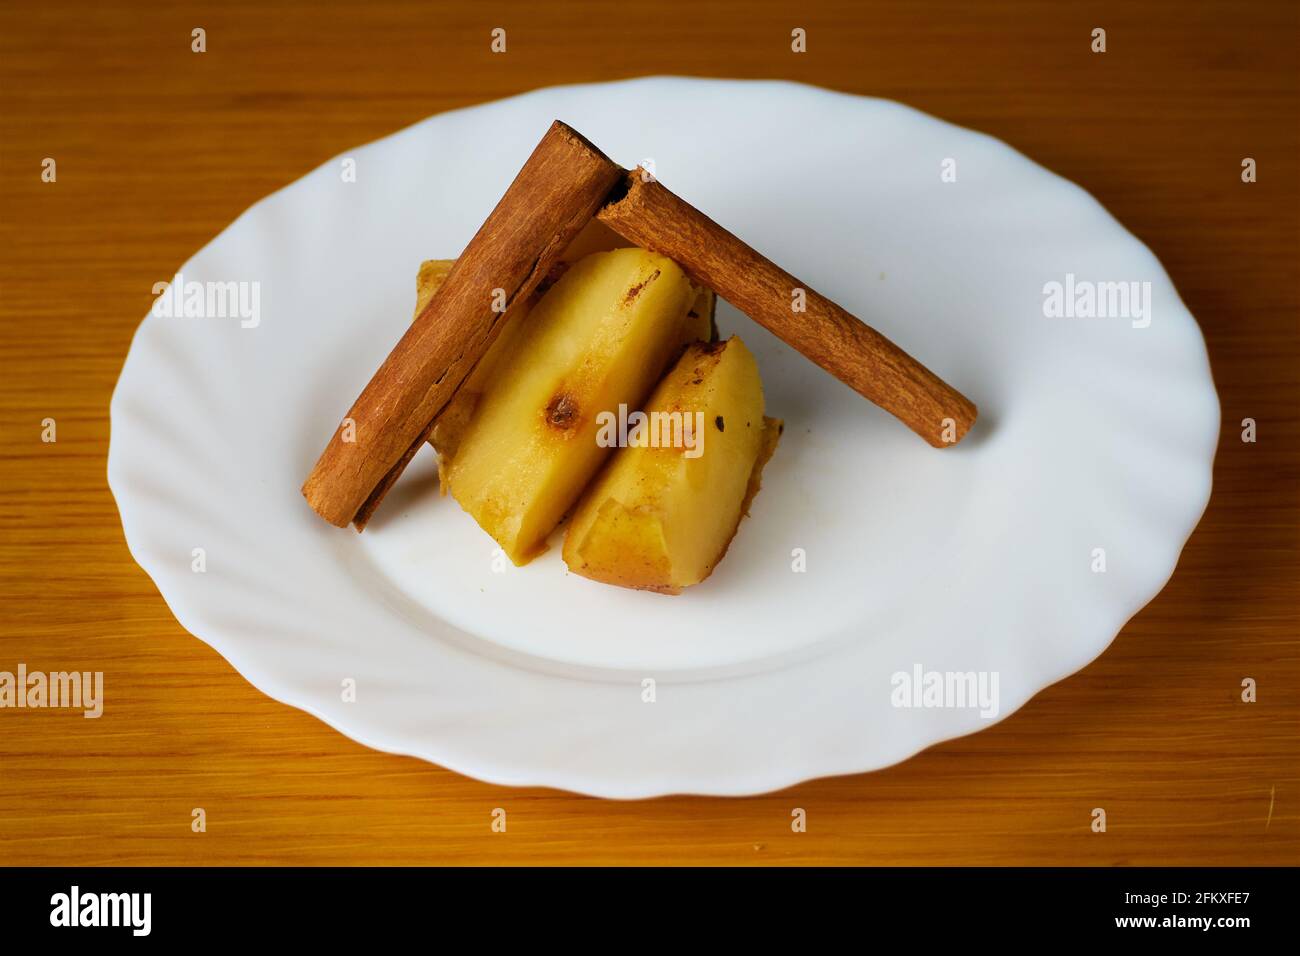 Baked Apple slices decorated with cinnamon sticks on a plate and wooden background Stock Photo